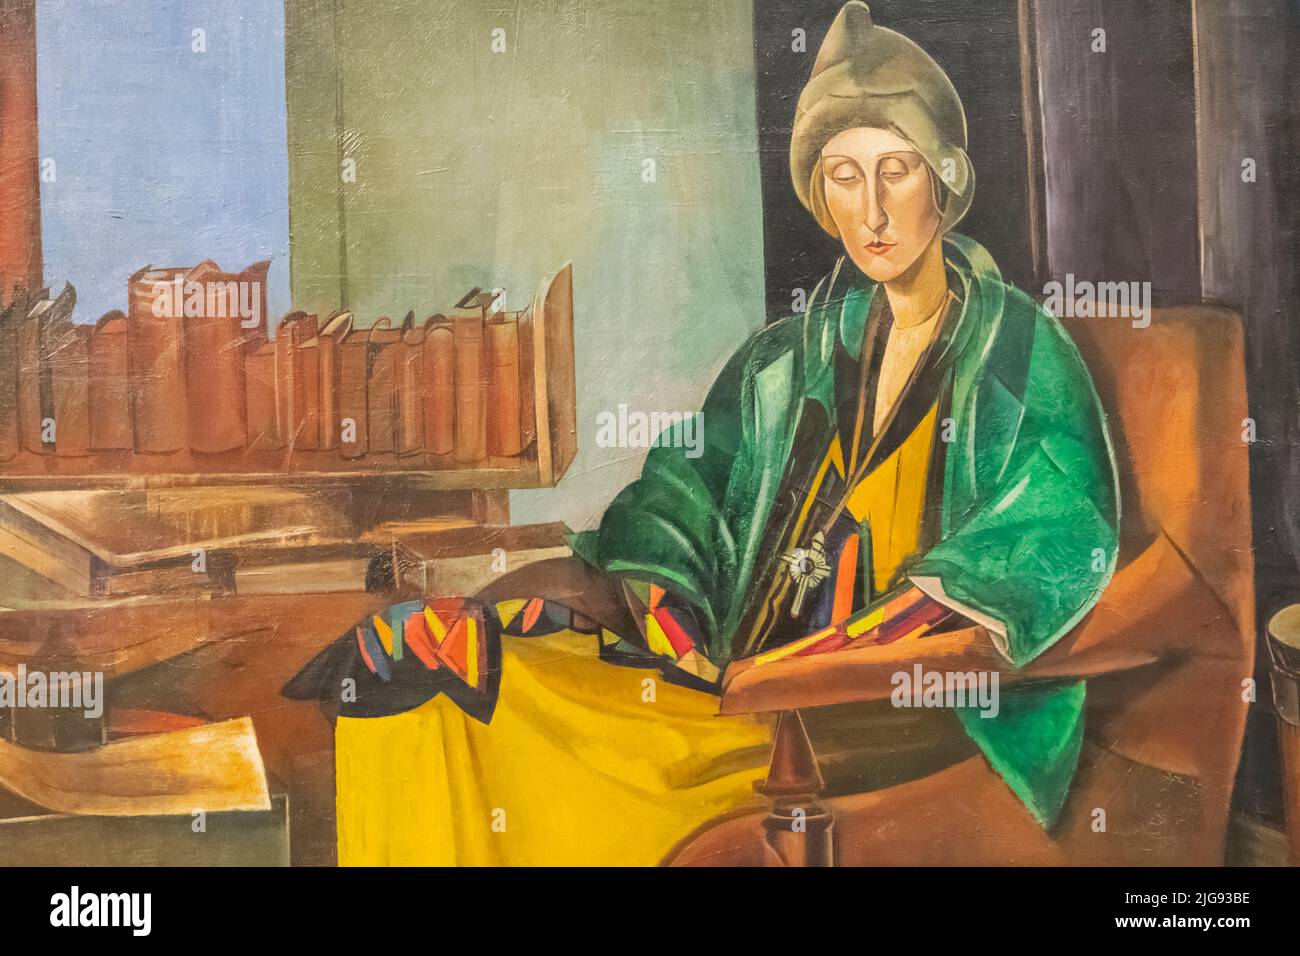 Painting titled 'Edith Sitwell' by Wyndham Lewis dated 1923-35 Stock Photo